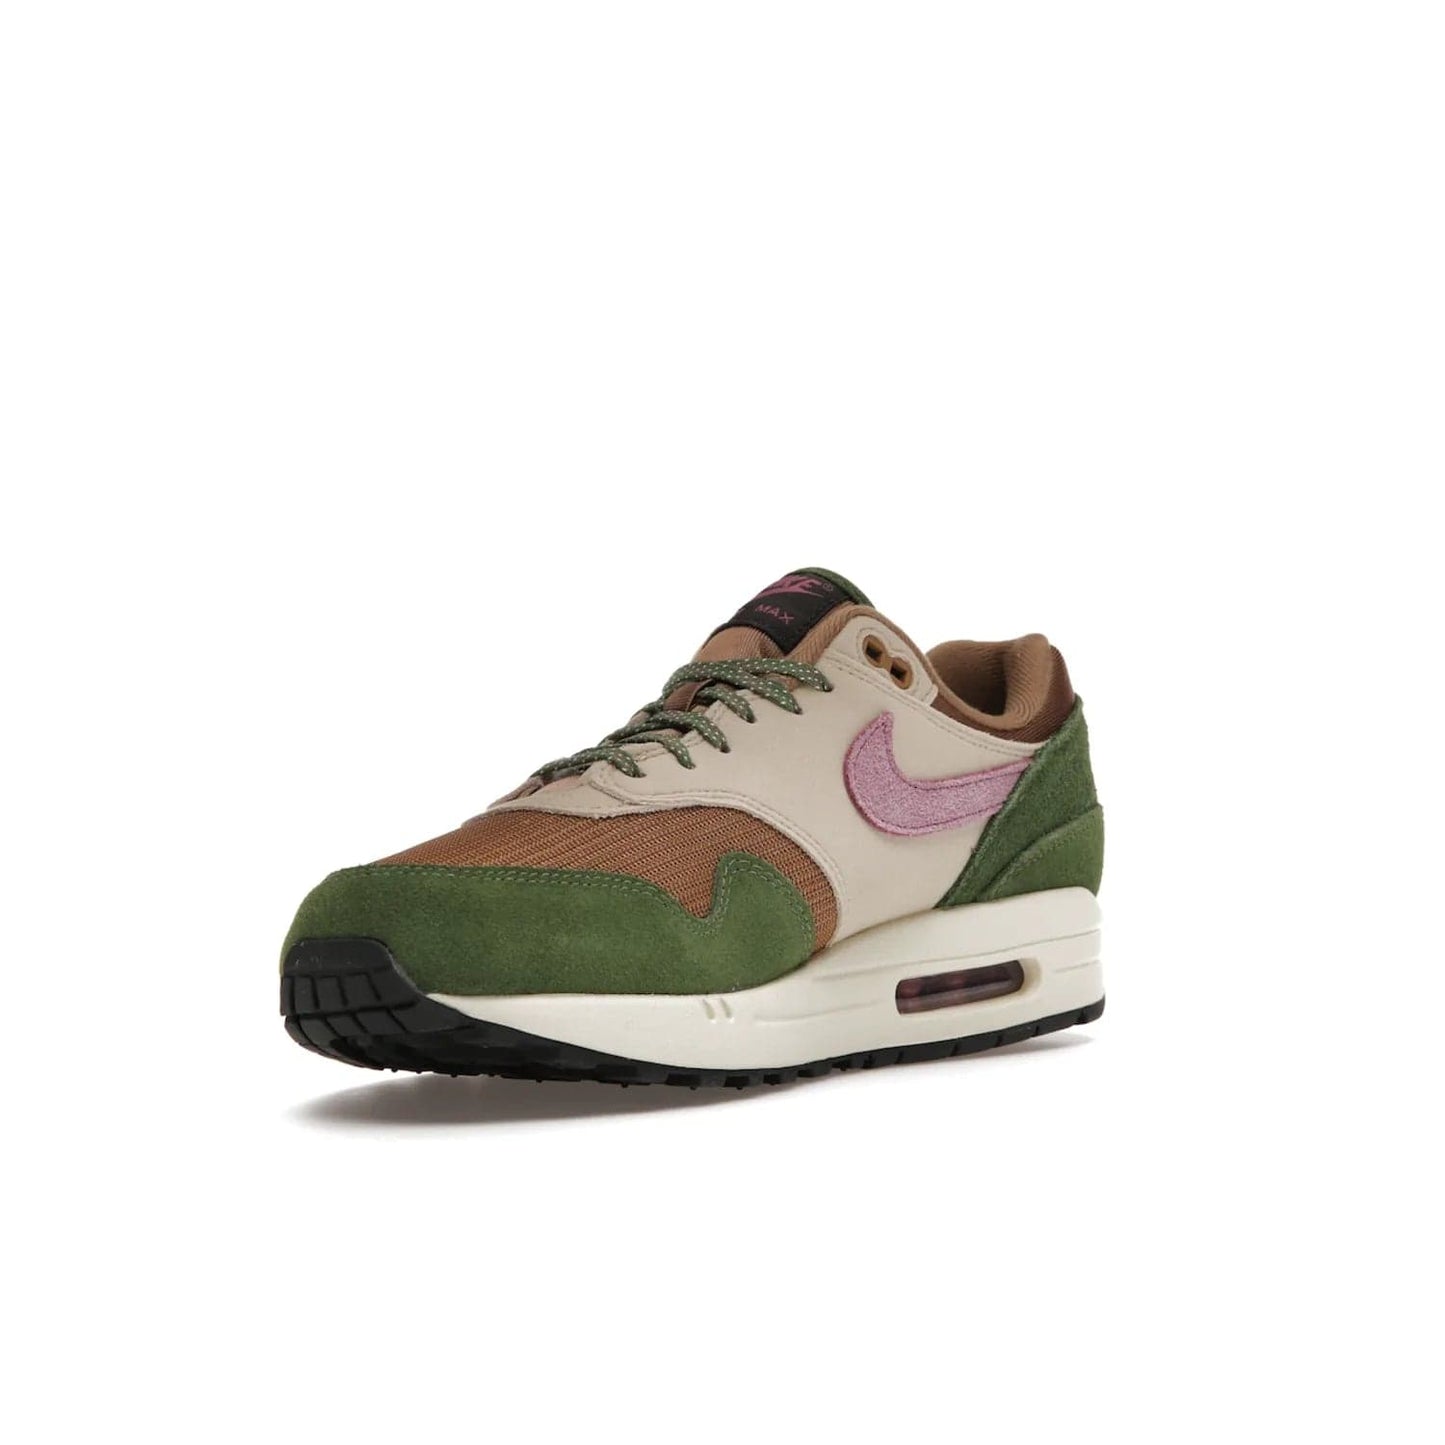 Nike Air Max 1 SH Treeline - Image 14 - Only at www.BallersClubKickz.com - A classic Nike Air Max 1 SH Treeline with a brown mesh upper, taupe Durabuck overlays, and hairy green suede details. Light Bordeaux Swoosh and woven tongue label for a pop of color. Released in May 2022. Perfect for any outfit and sure to impress.